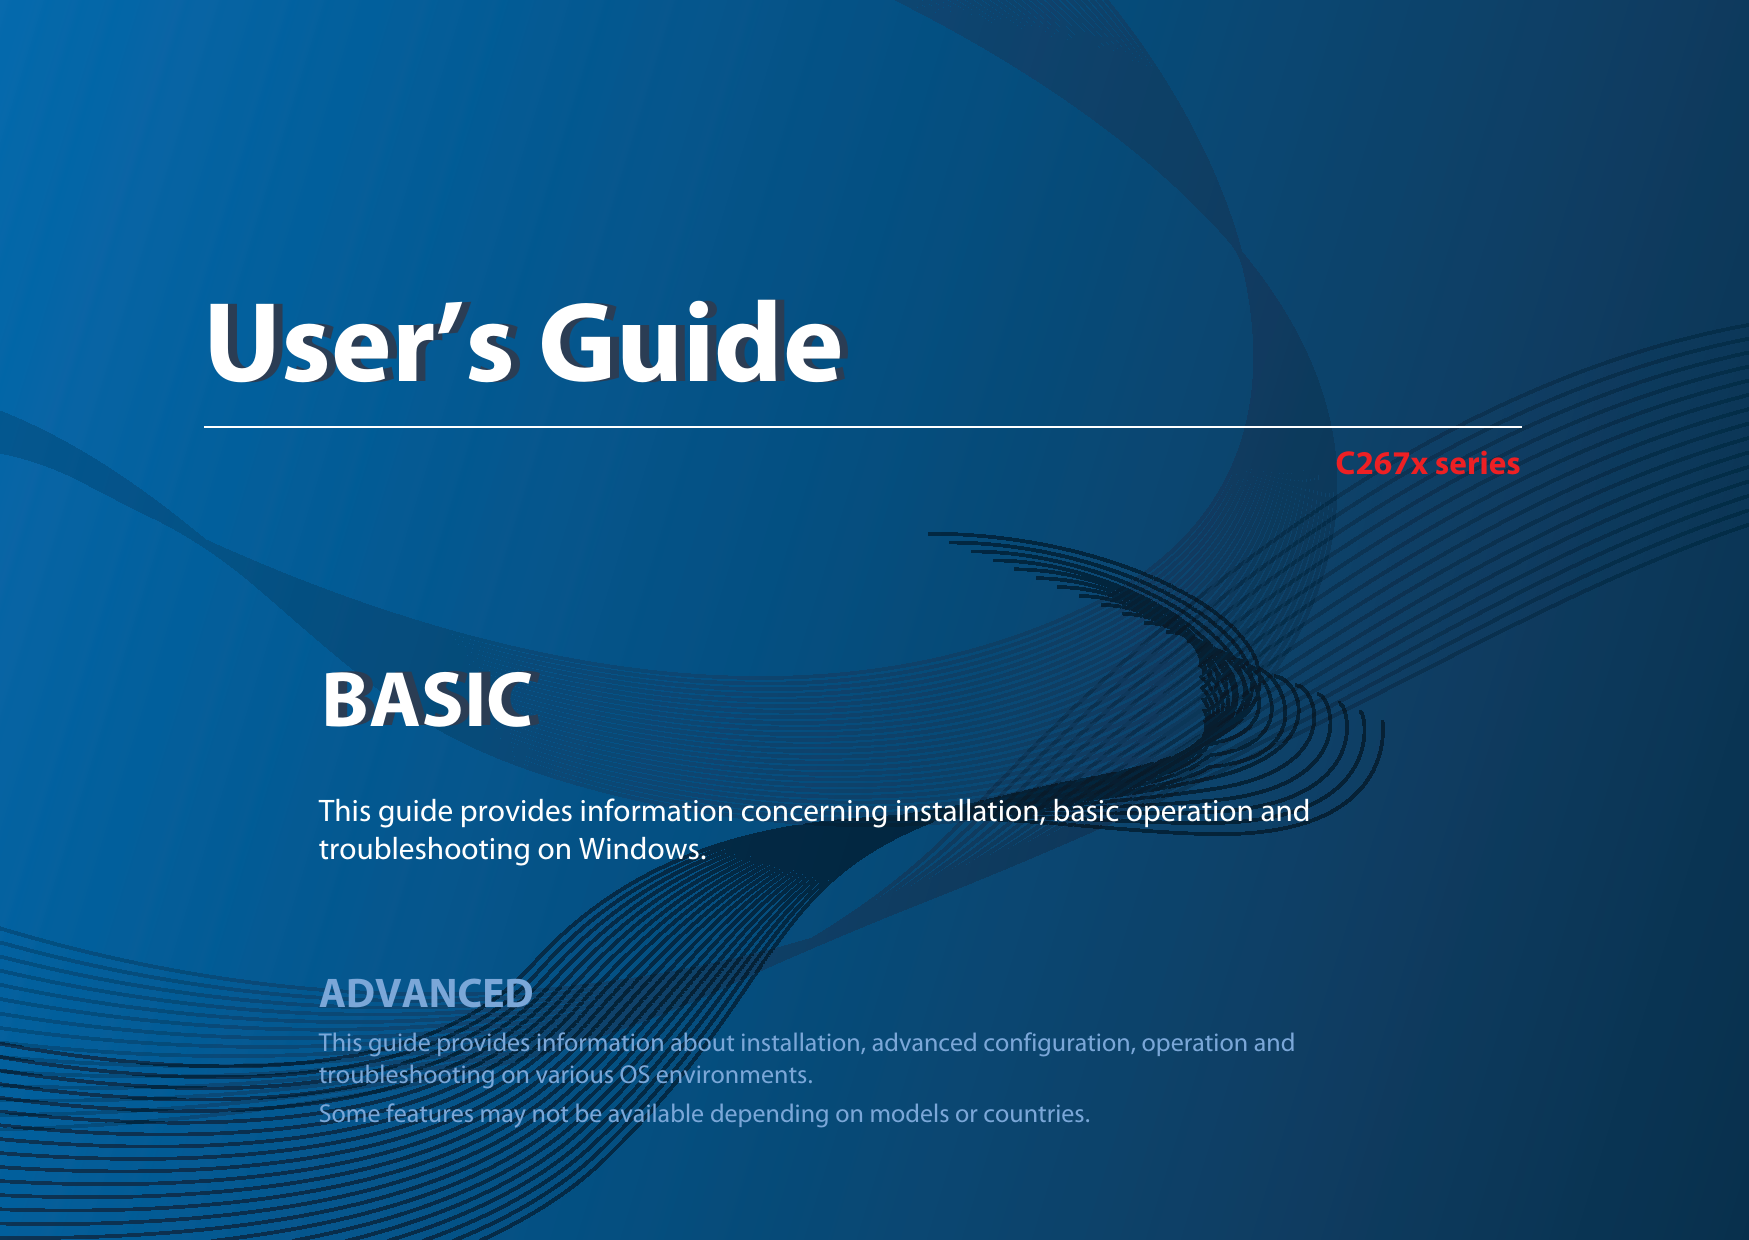 BASICUser’s GuideC267x seriesBASICUser’s GuideThis guide provides information concerning installation, basic operation and troubleshooting on Windows.ADVANCEDThis guide provides information about installation, advanced configuration, operation and troubleshooting on various OS environments. Some features may not be available depending on models or countries.